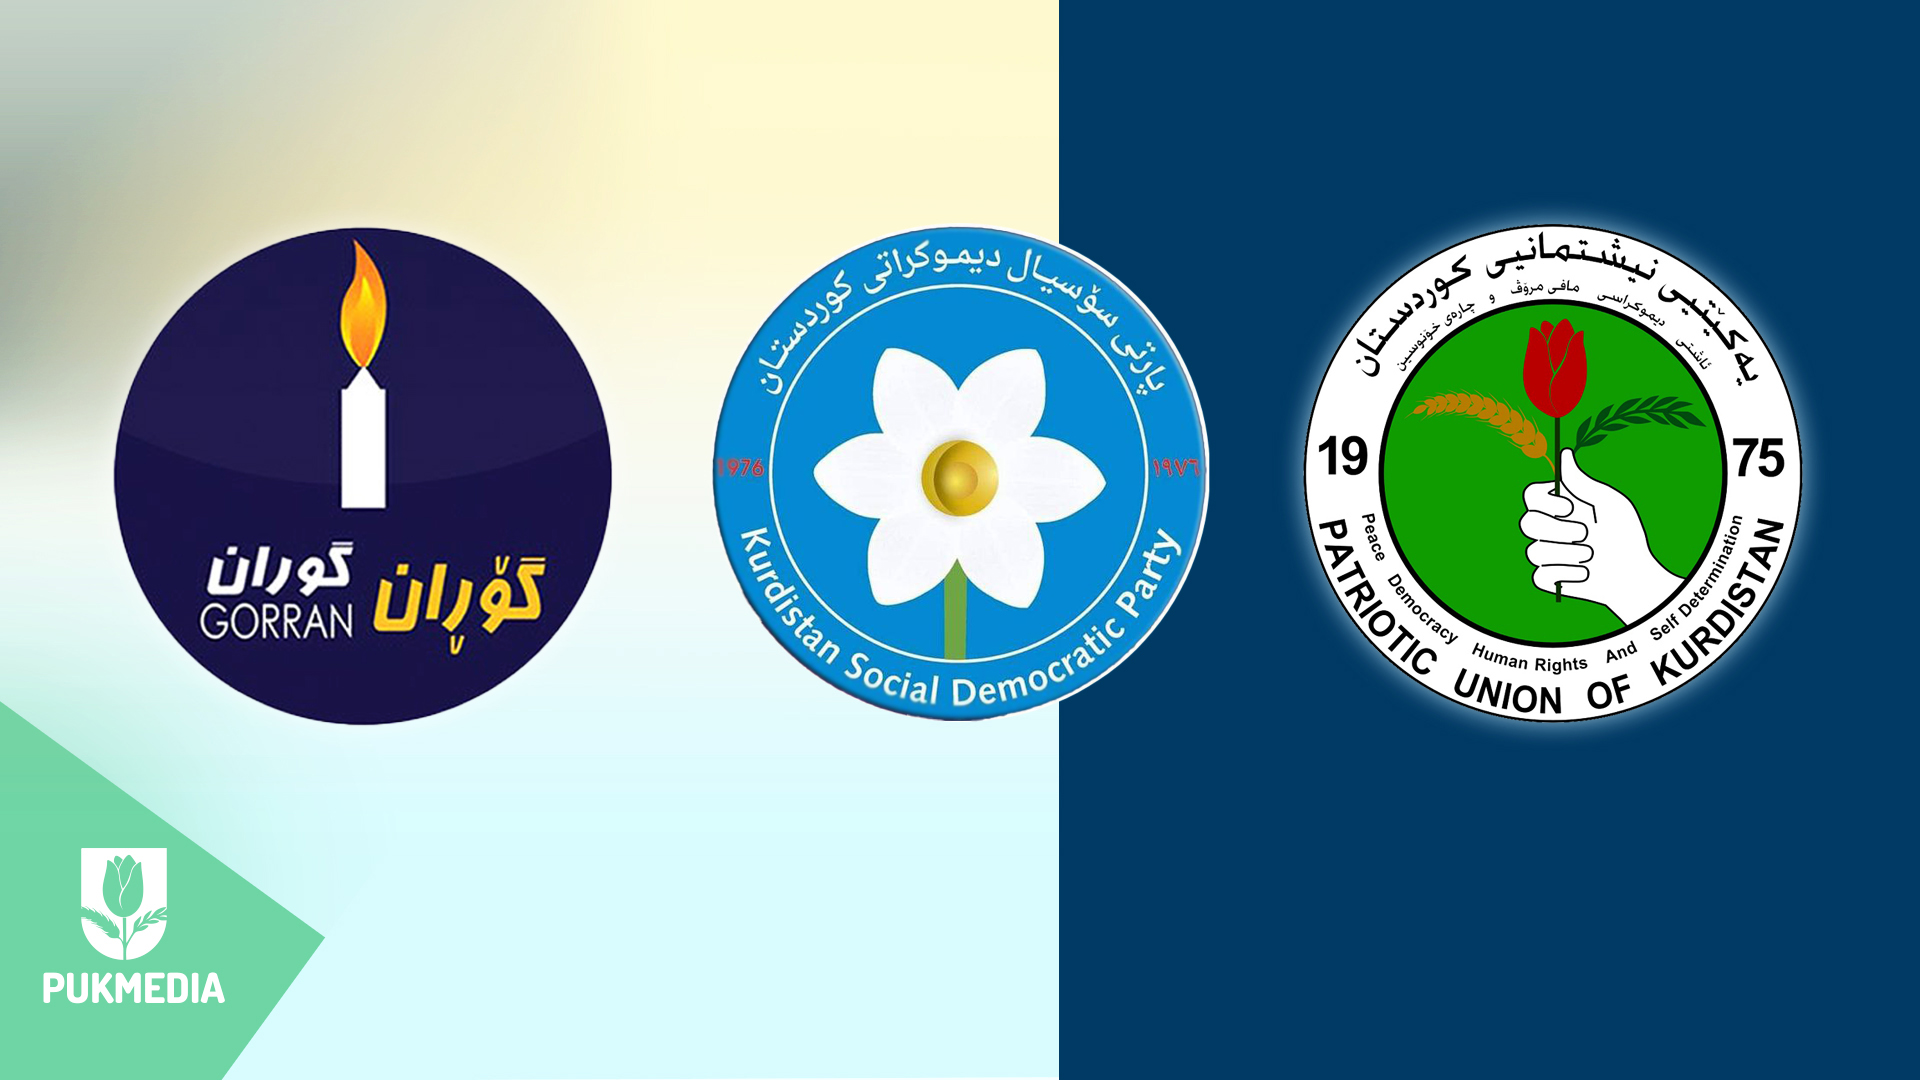 From right to left, the logos of PUK, Kurdistan Social Democratic Party, and Gorran Movement 